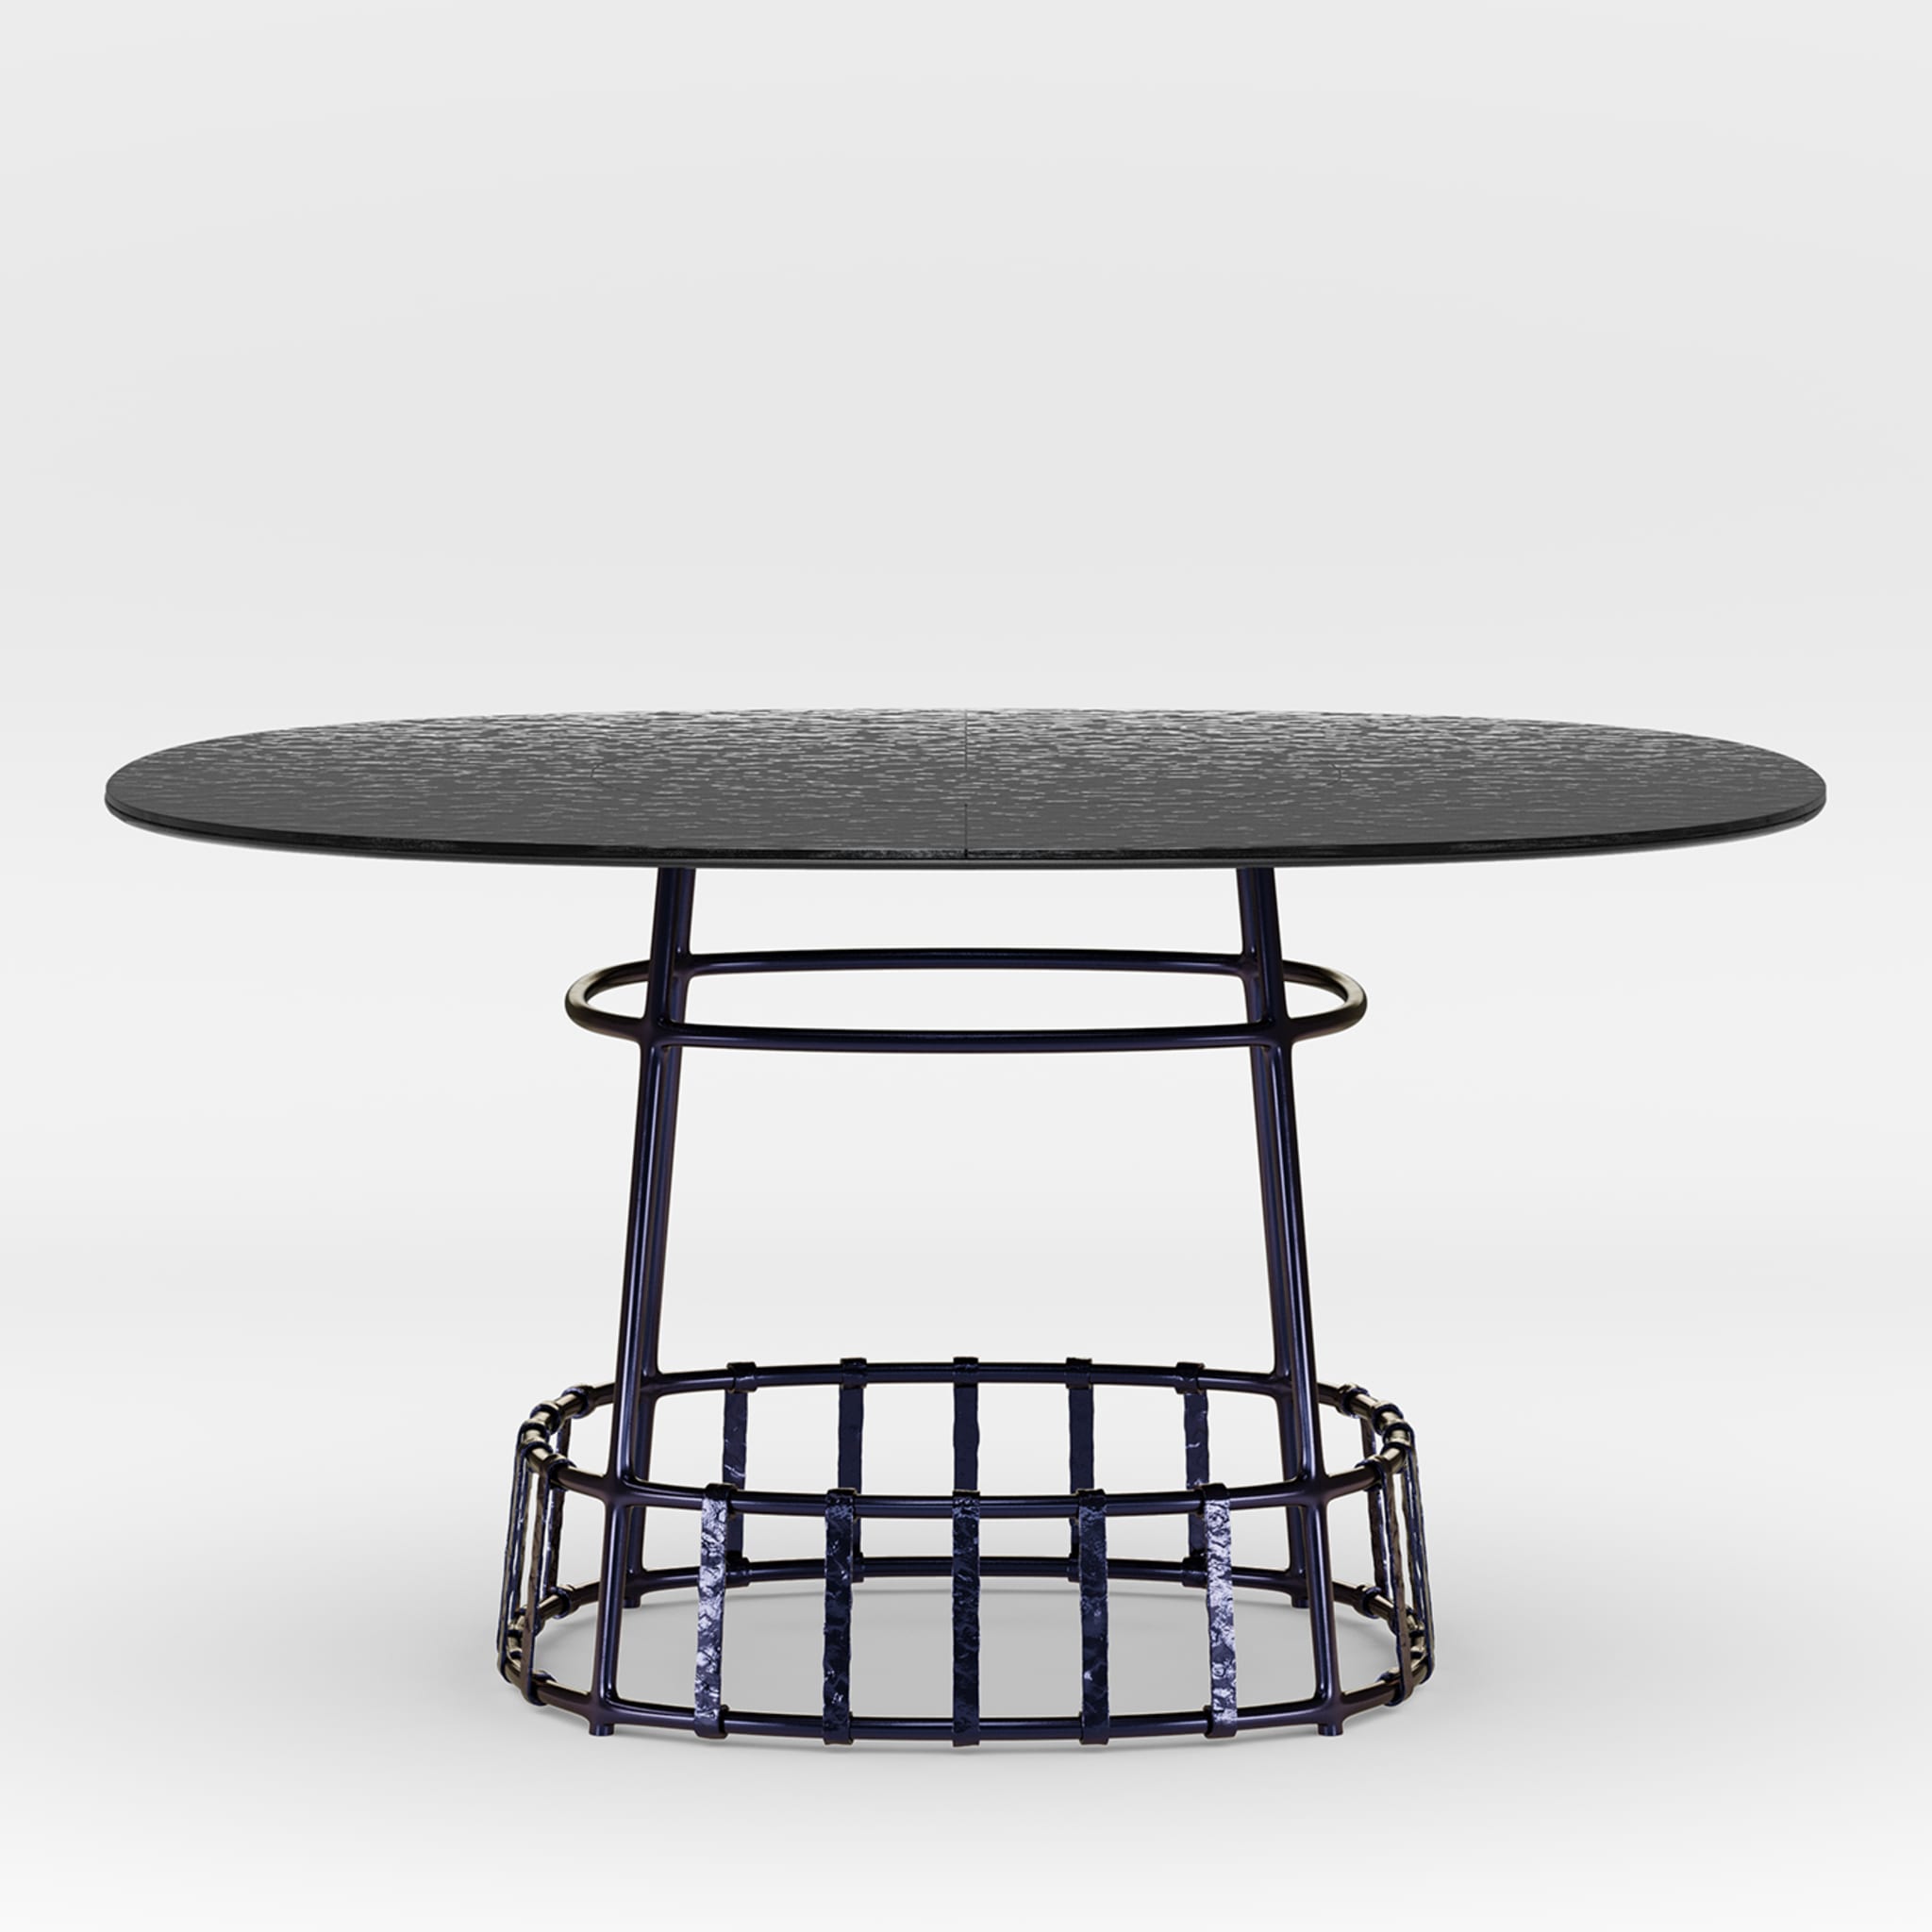 Dolmen Square Dining Table by Margherita Rui - Alternative view 3